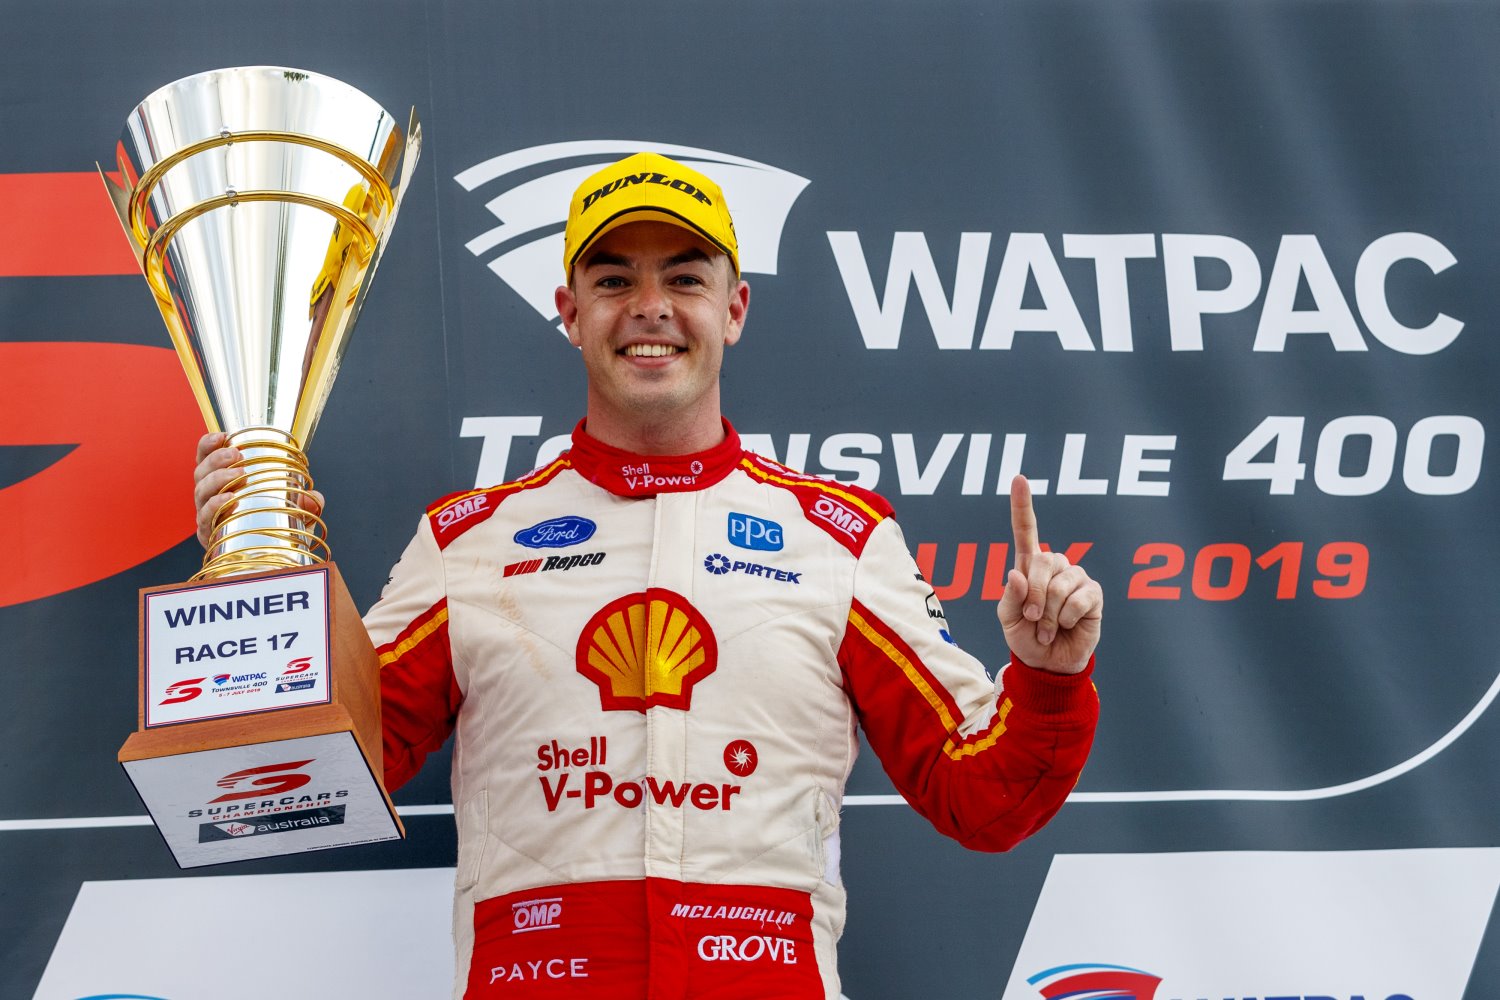 Another win for Penske and McLaughlin